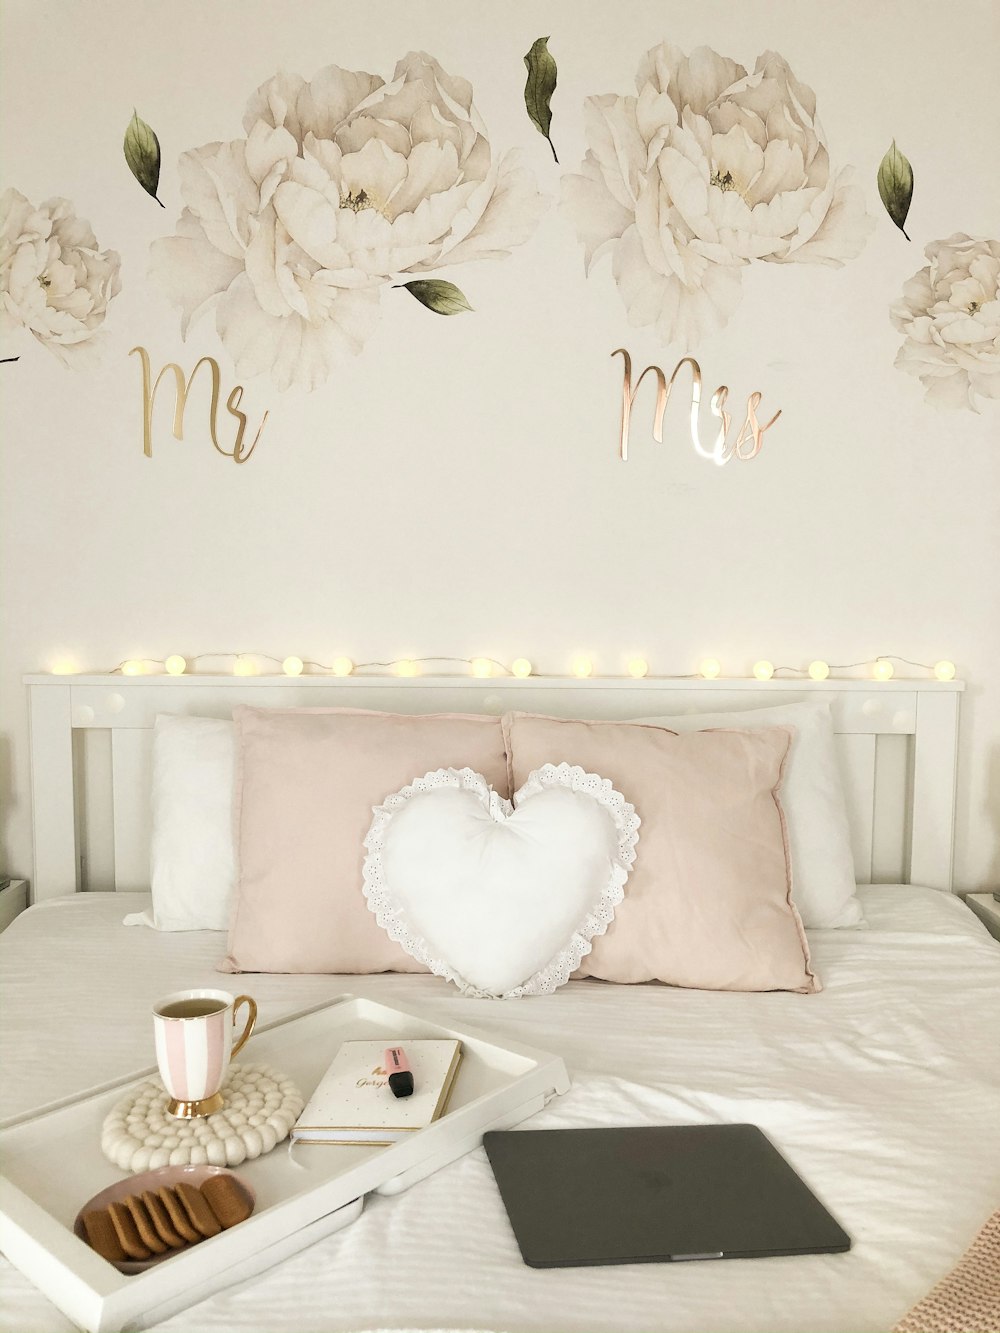 white heart cushion pillow near coffee in mug, white book, and cookies on tray on top of white bed